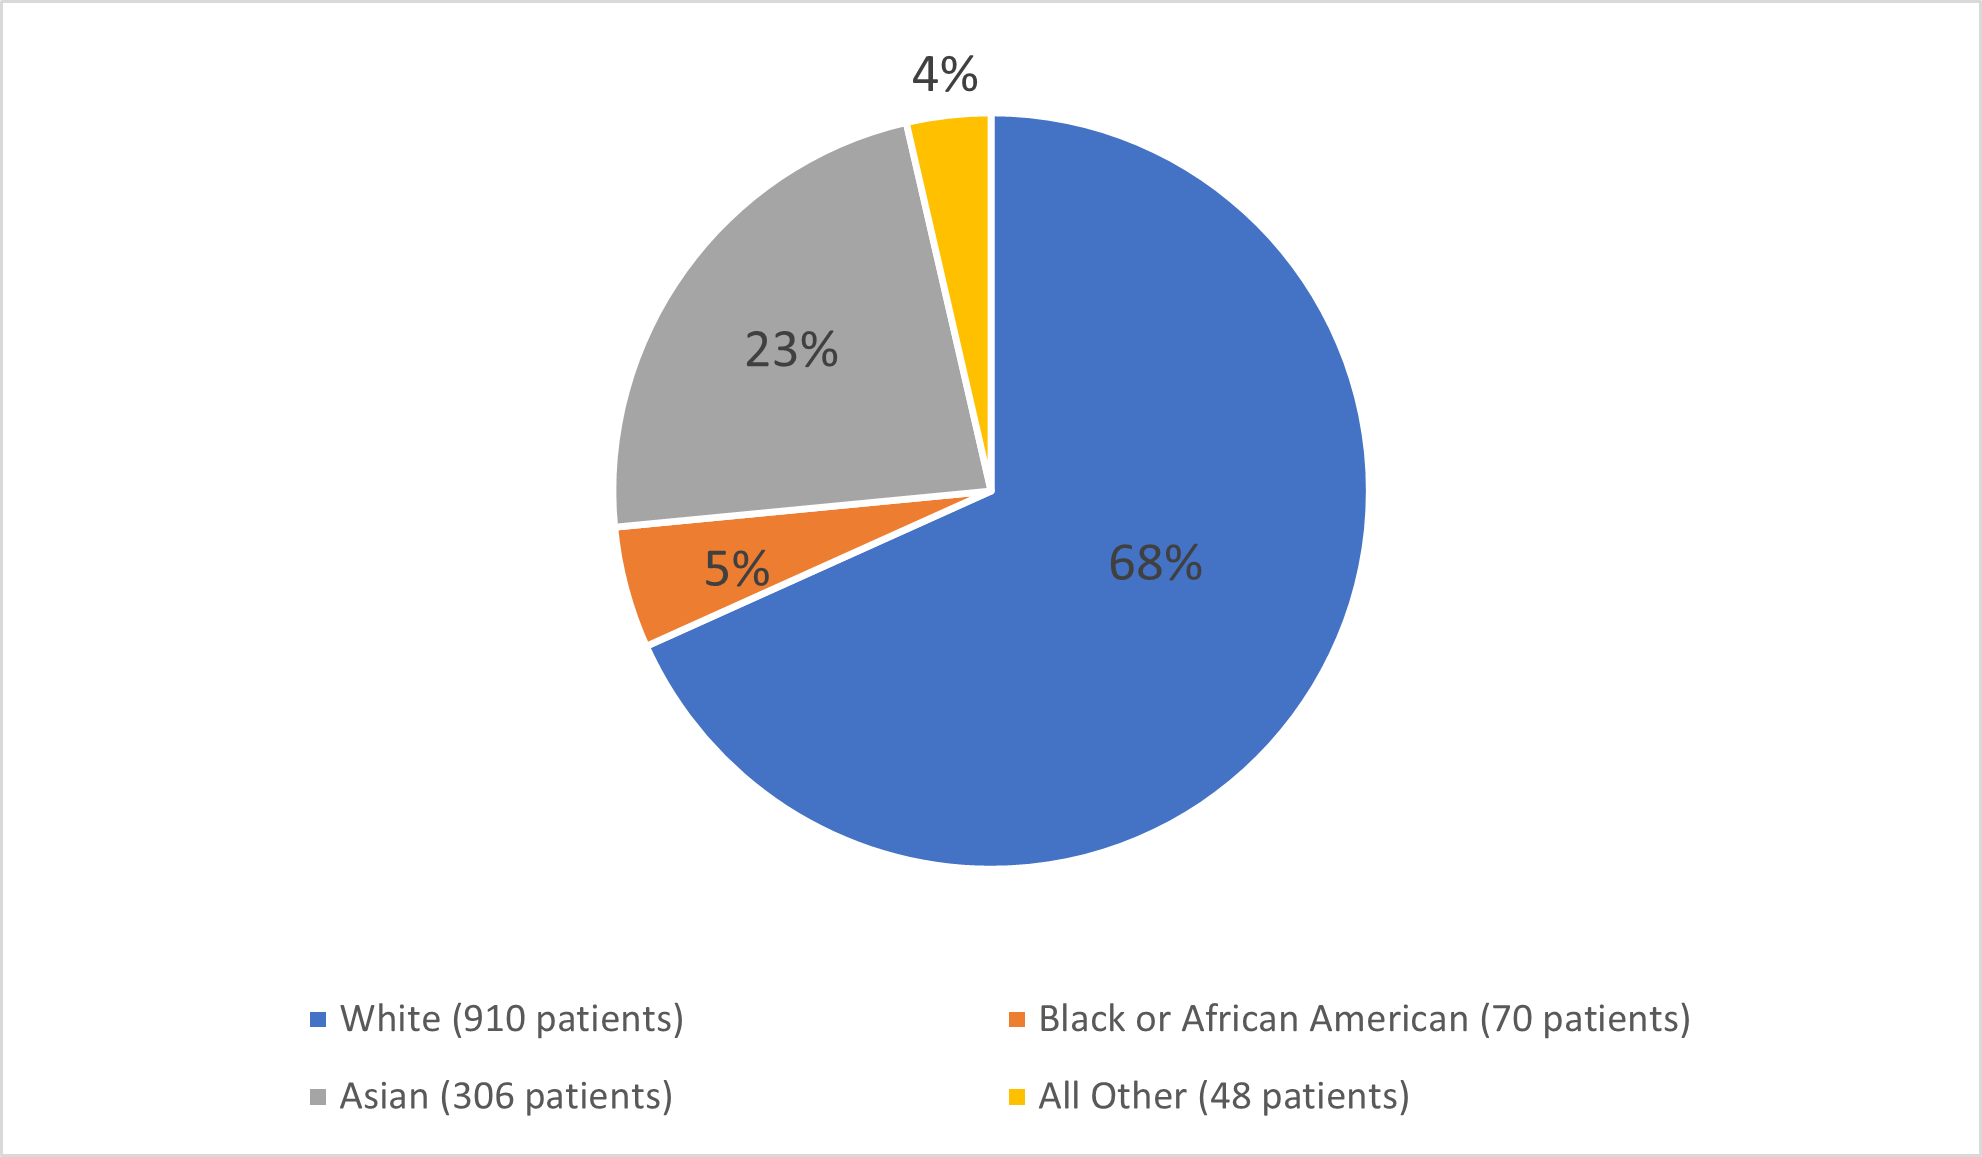 Pie chart summarizing how many White, Black, Asian, and other patients were in the clinical trial.  In total, 910 (68%) white patients, 306(23%) Asian patients, 70(5%) Asian patients, and 48 (4%) Other patients participated in the clinical trial.